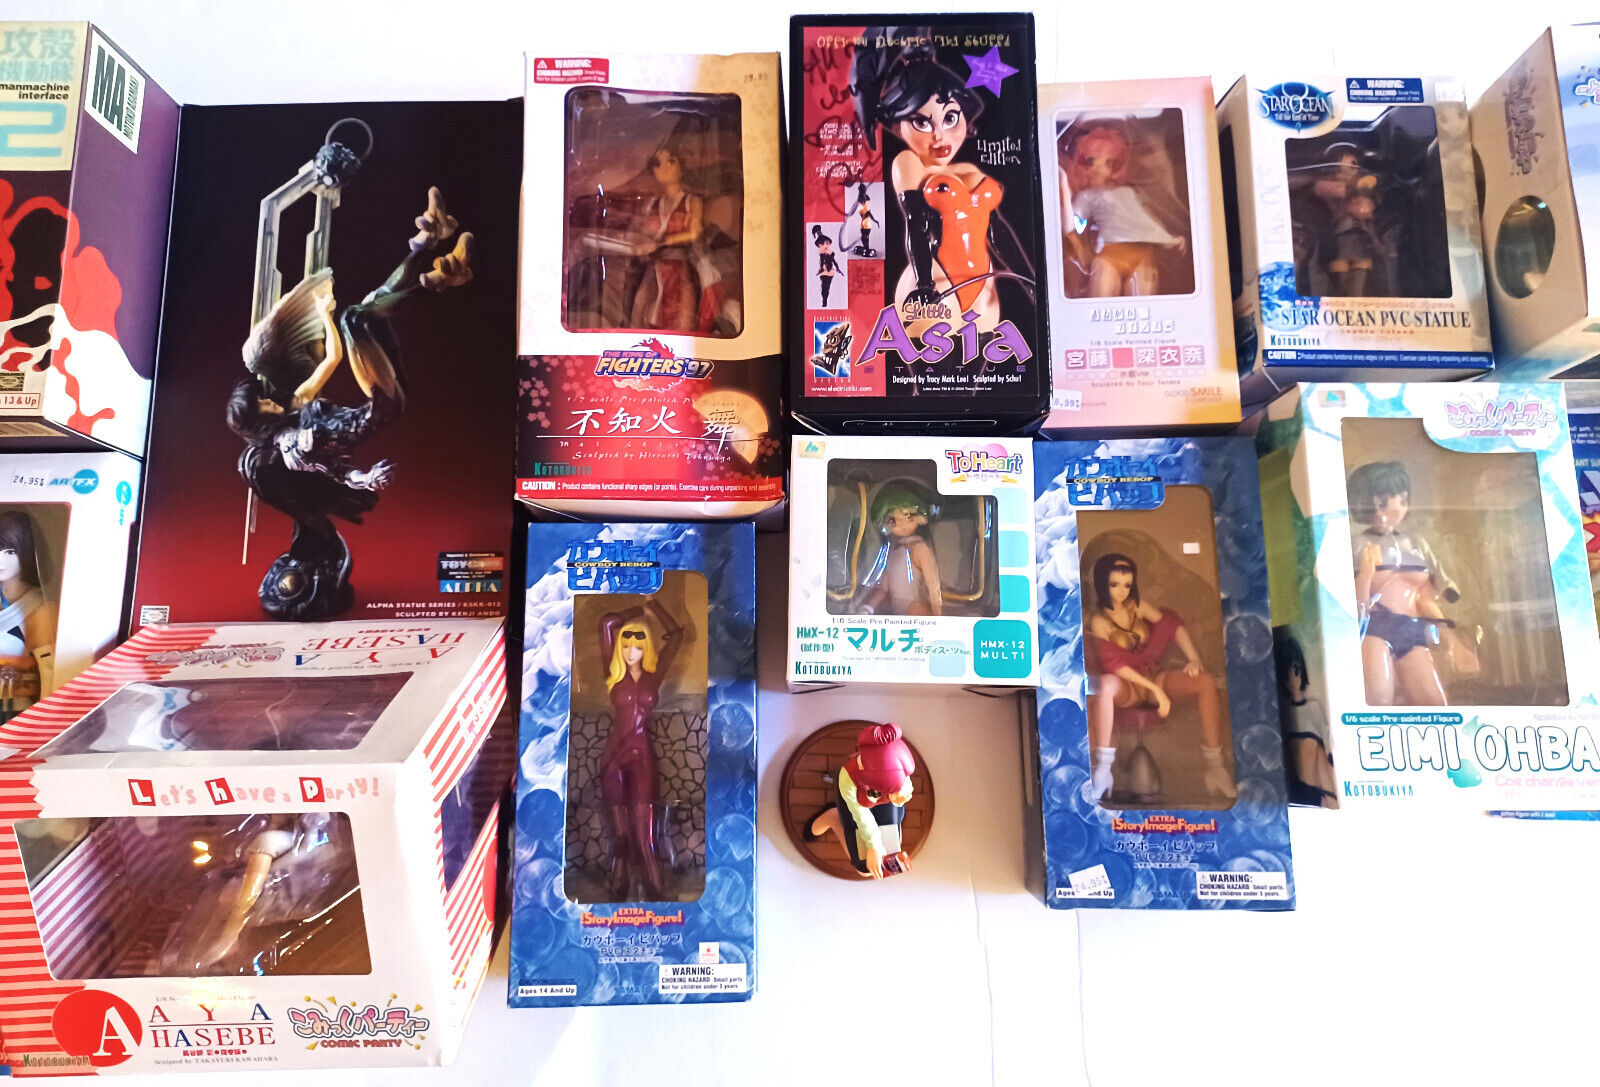 49 STATUES: ANIME, ACTION FIGURES, DC, etc. CONTACT SELLER 2 BUY 1 or SOME.